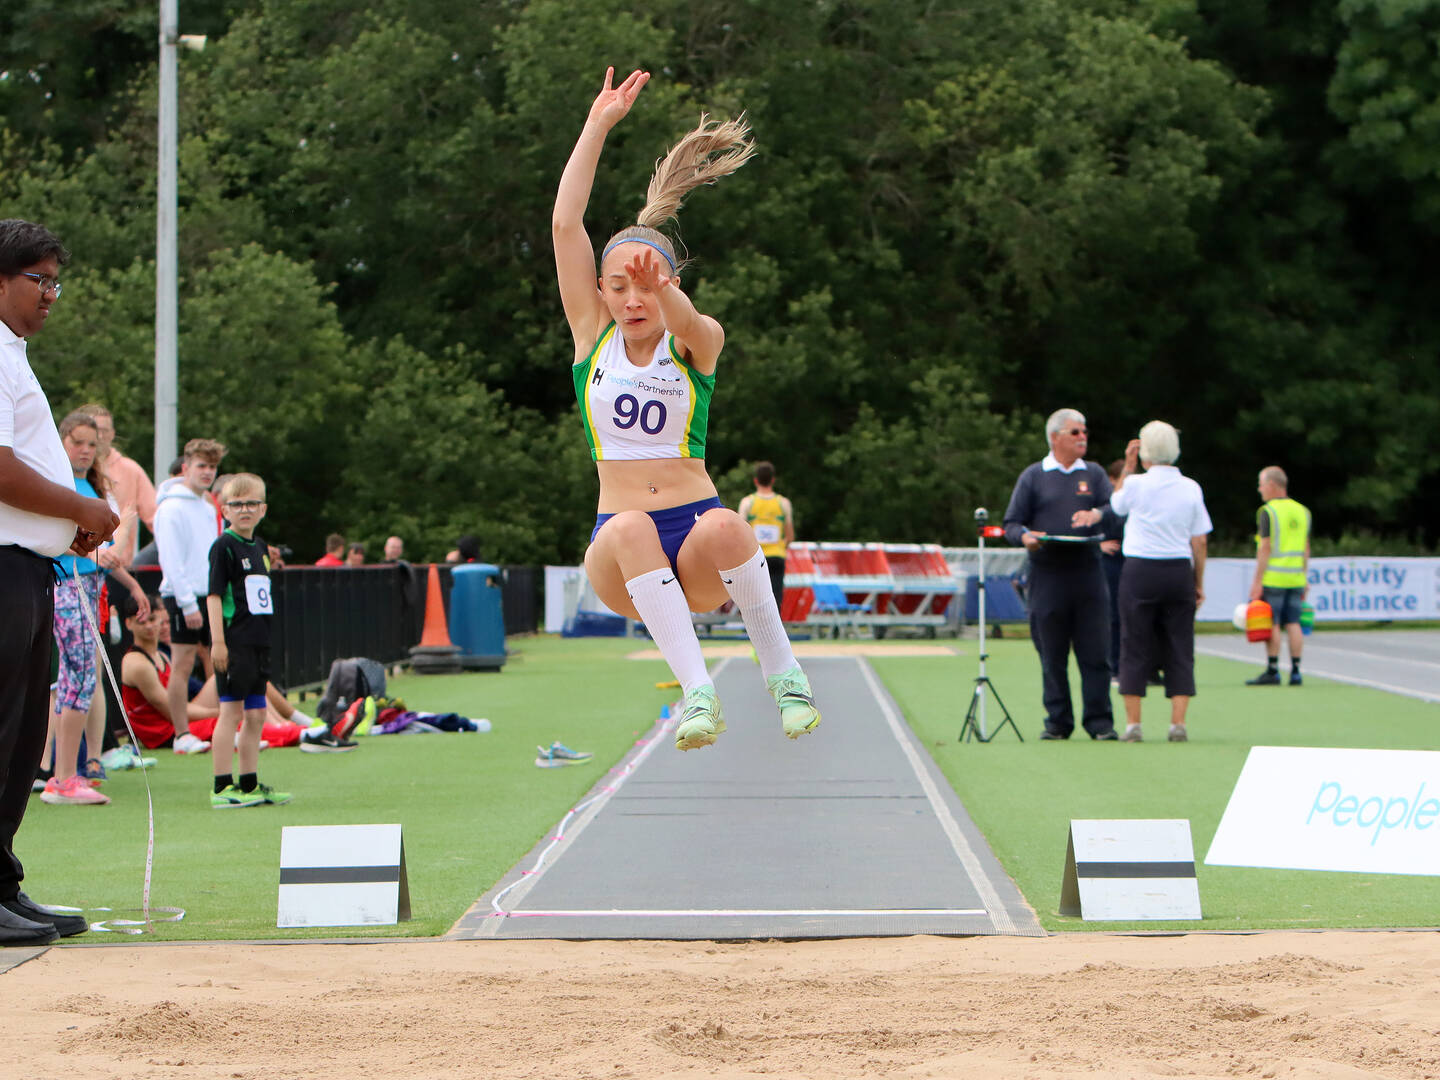 A girl jumps into a sand pit in the long jump at an athletics competition.